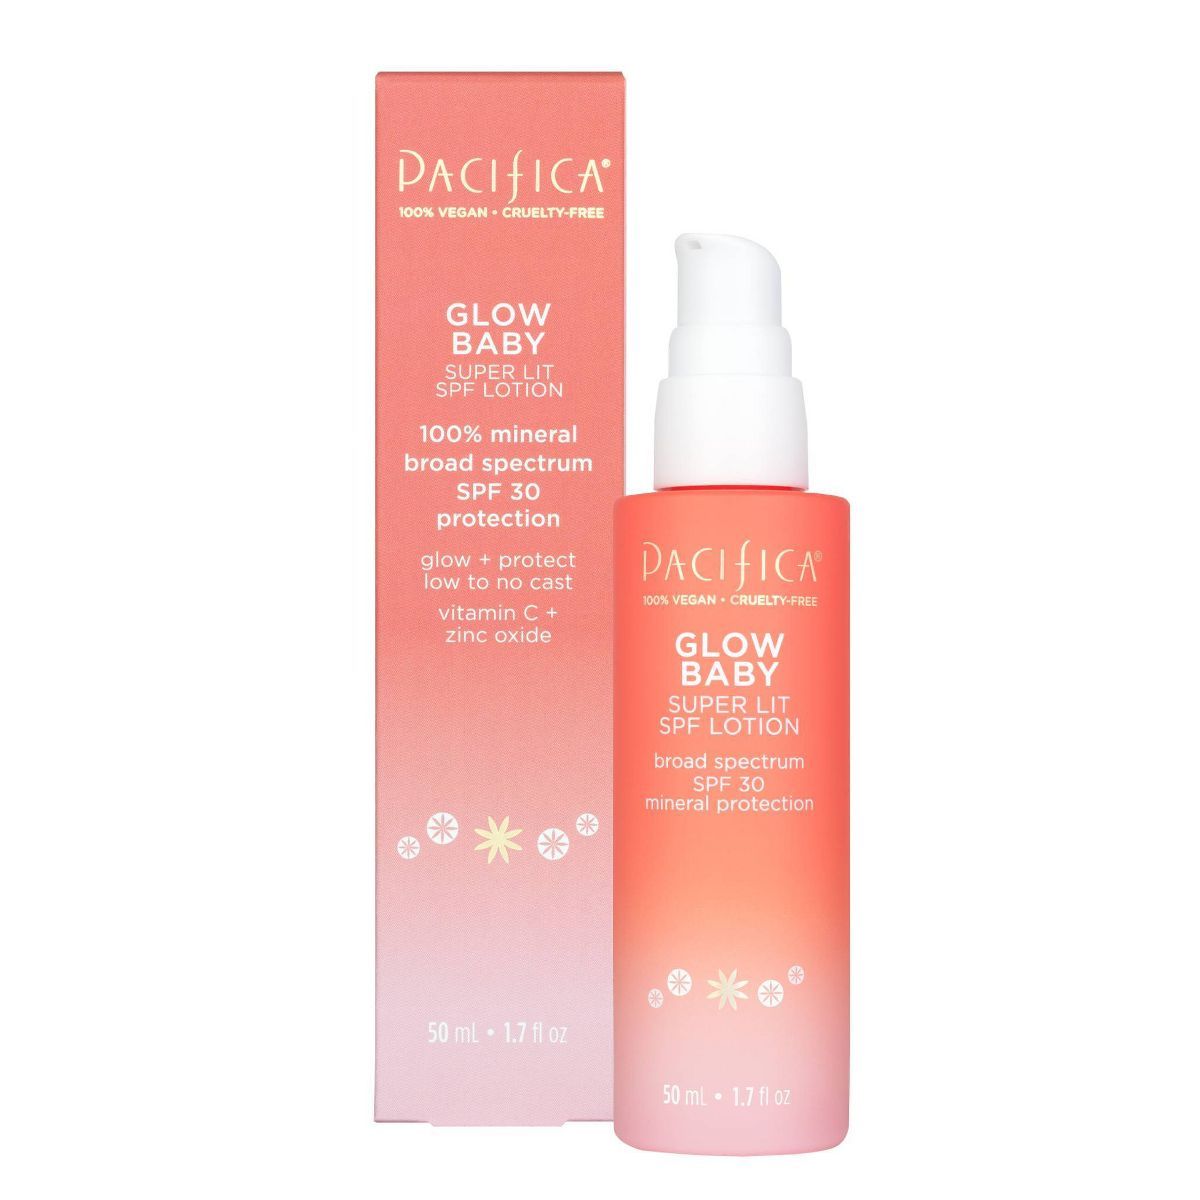 Pacifica Glow Baby Super Glow Face Lotion - SPF 30 - 1.7 fl oz | Target